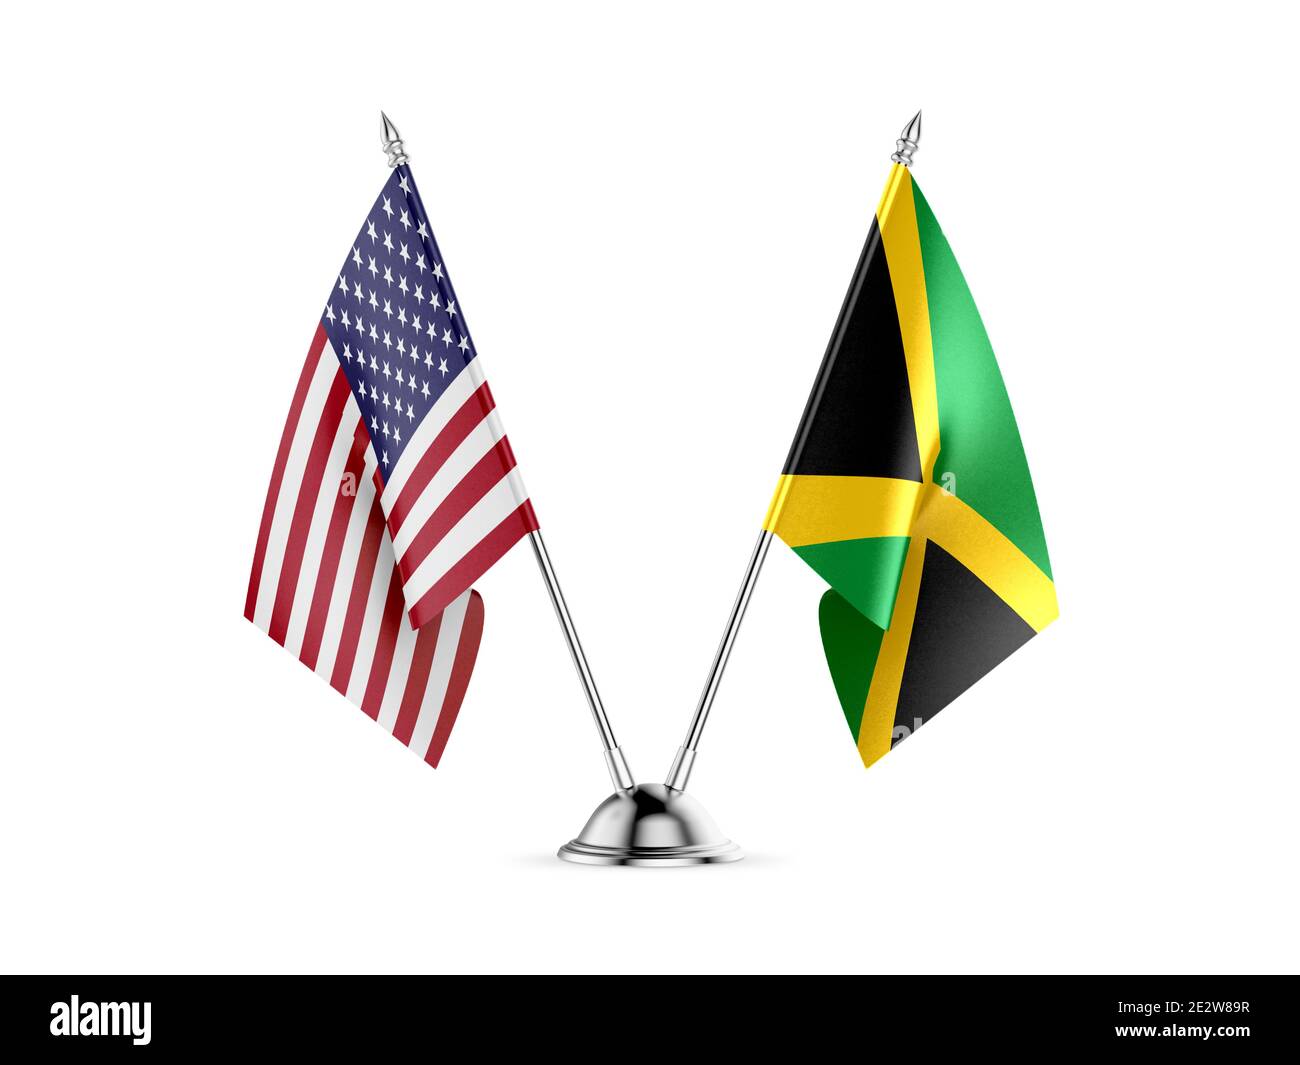 Desk flags, United States  America  and Jamaica, isolated on white background. 3d image Stock Photo